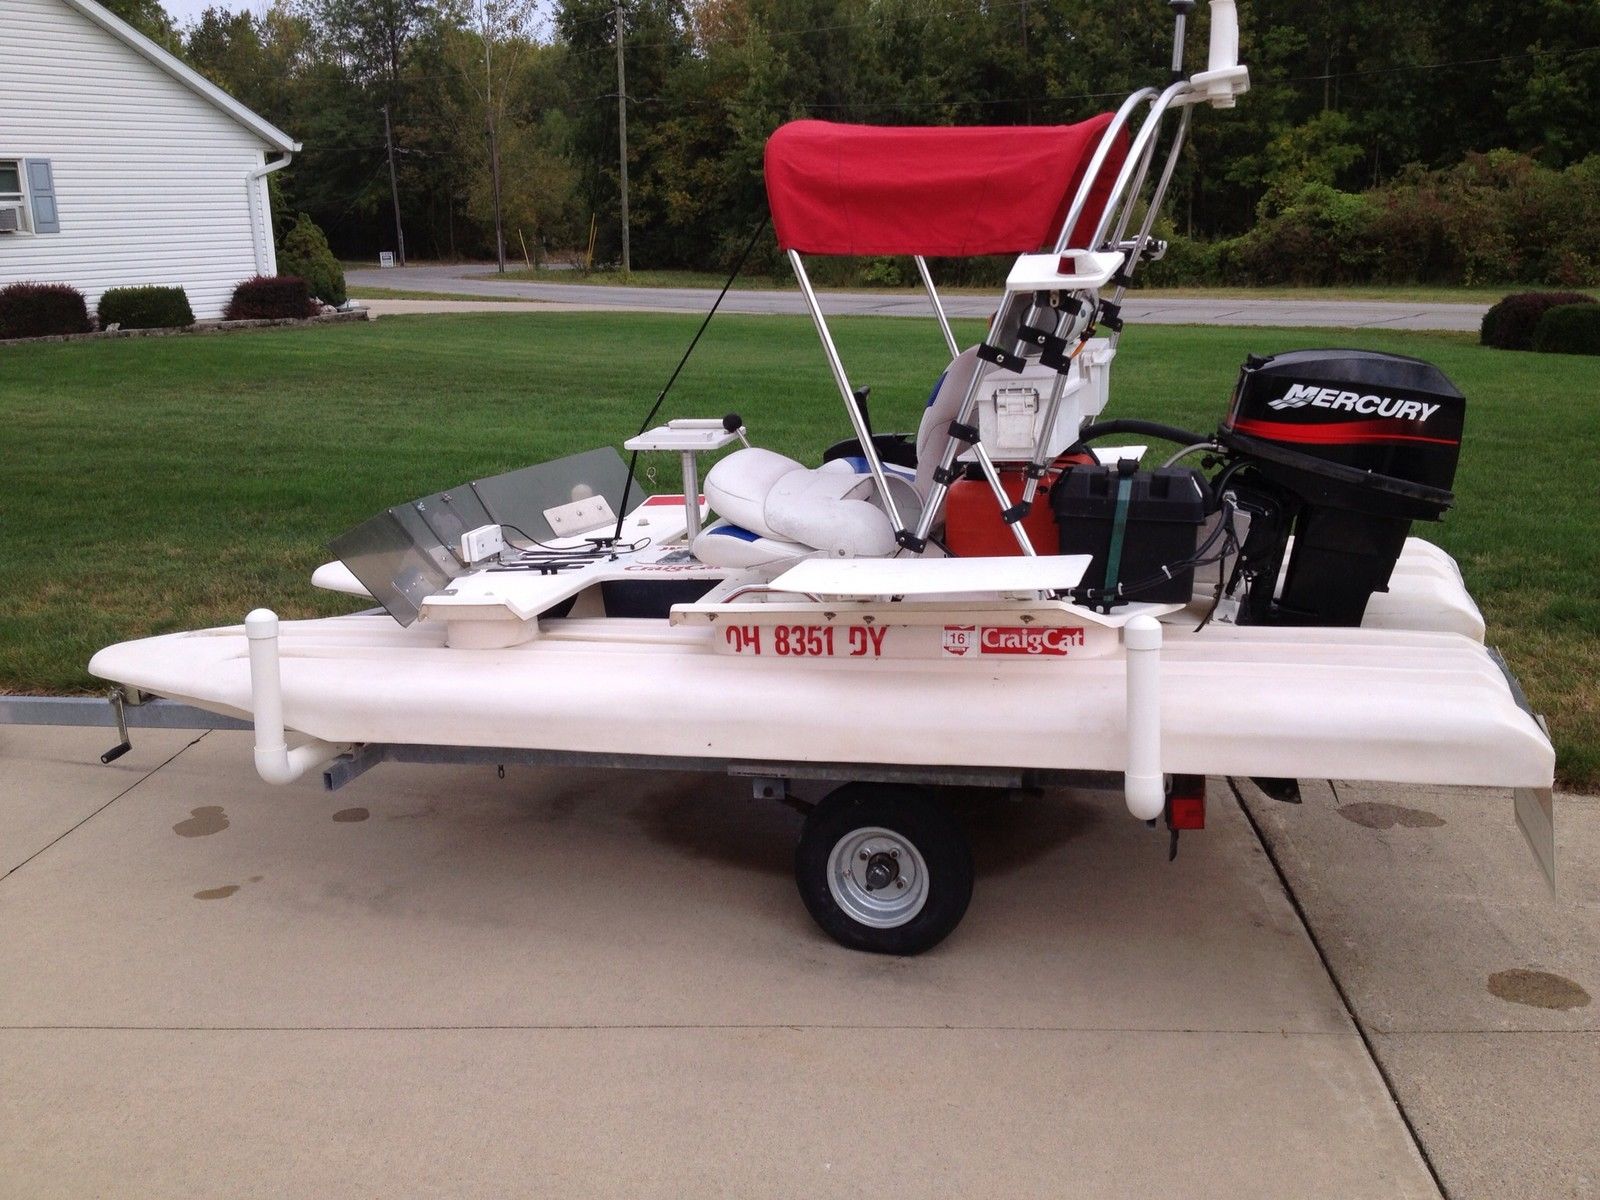 Craig Cat Fisher 2006 for sale for 5,500